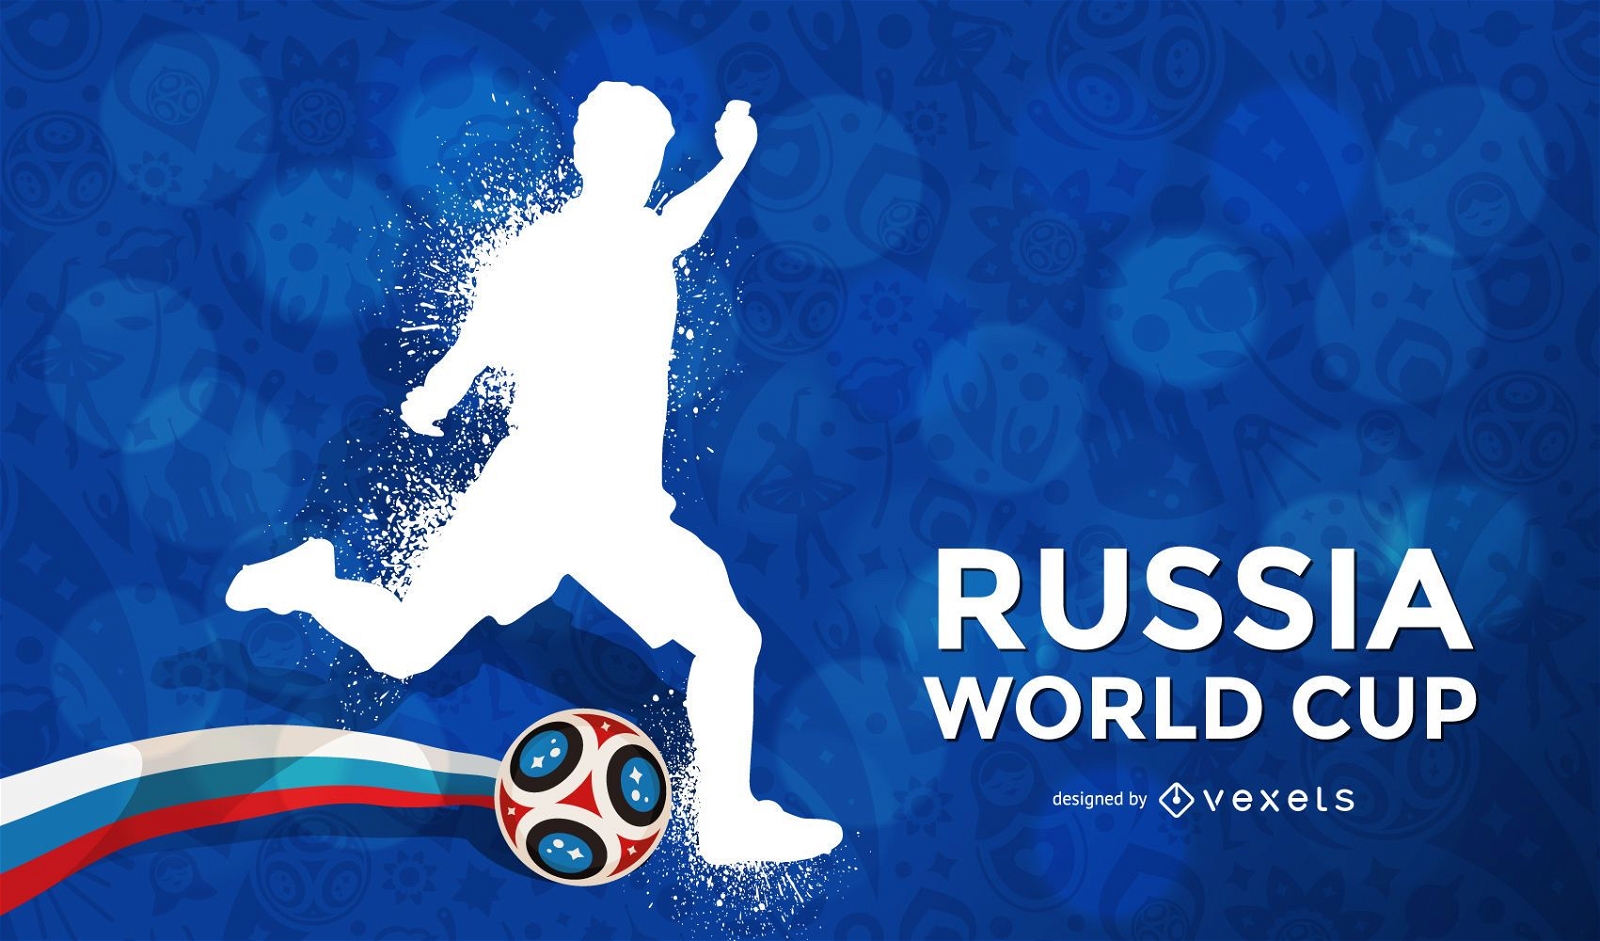 Russia world cup soccer player silhouette background